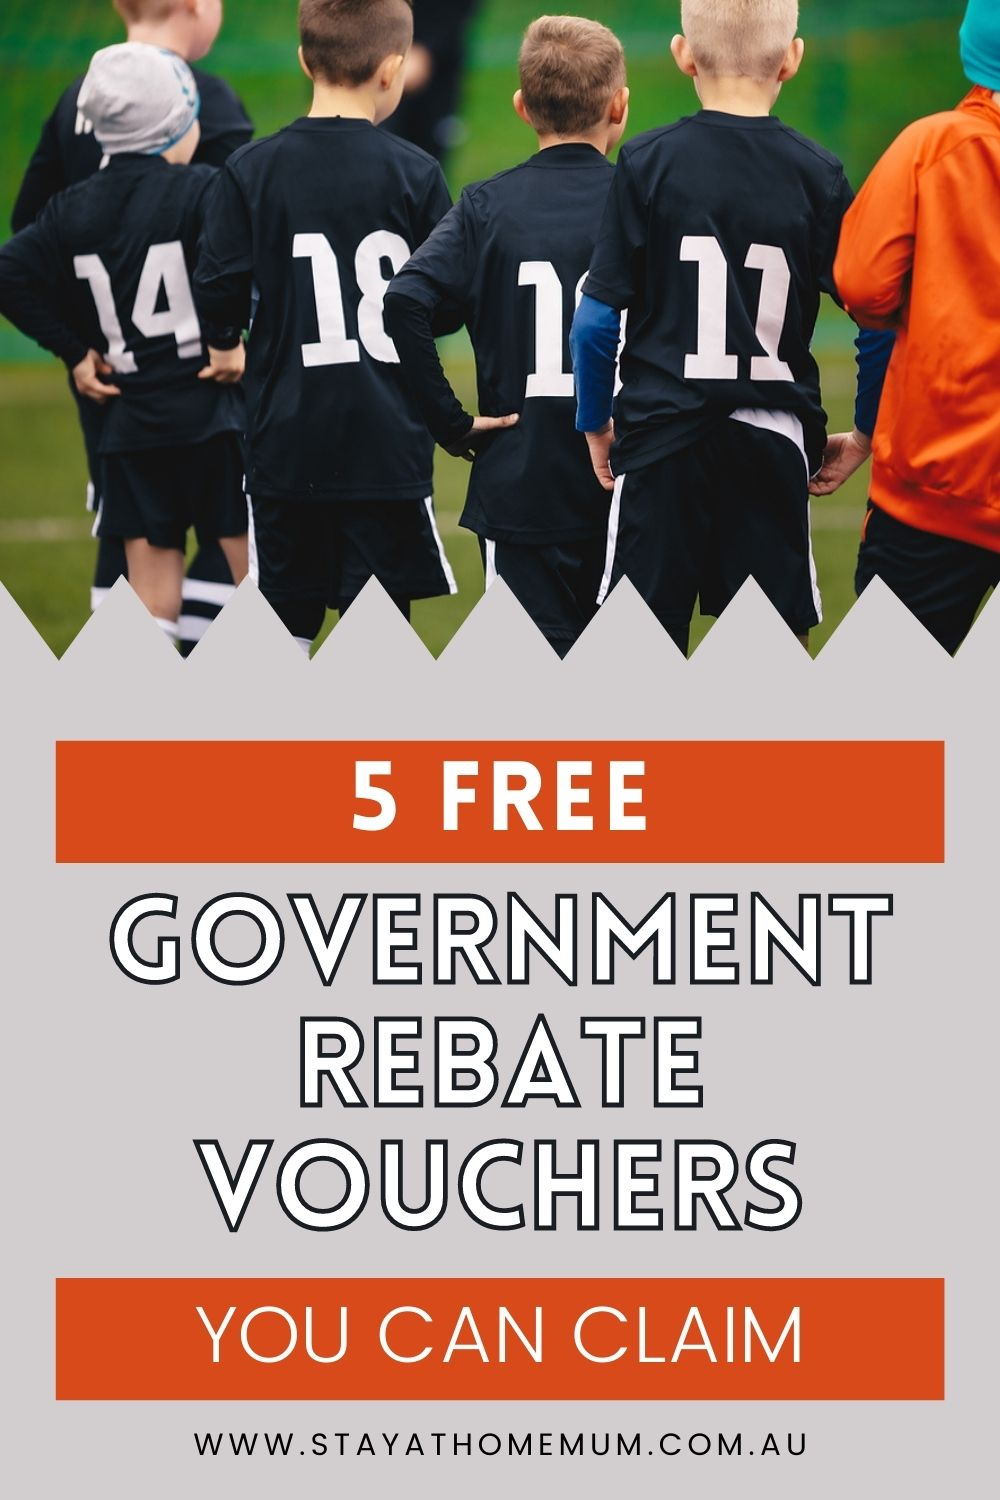 5 FREE Government Rebate Vouchers You Can Claim